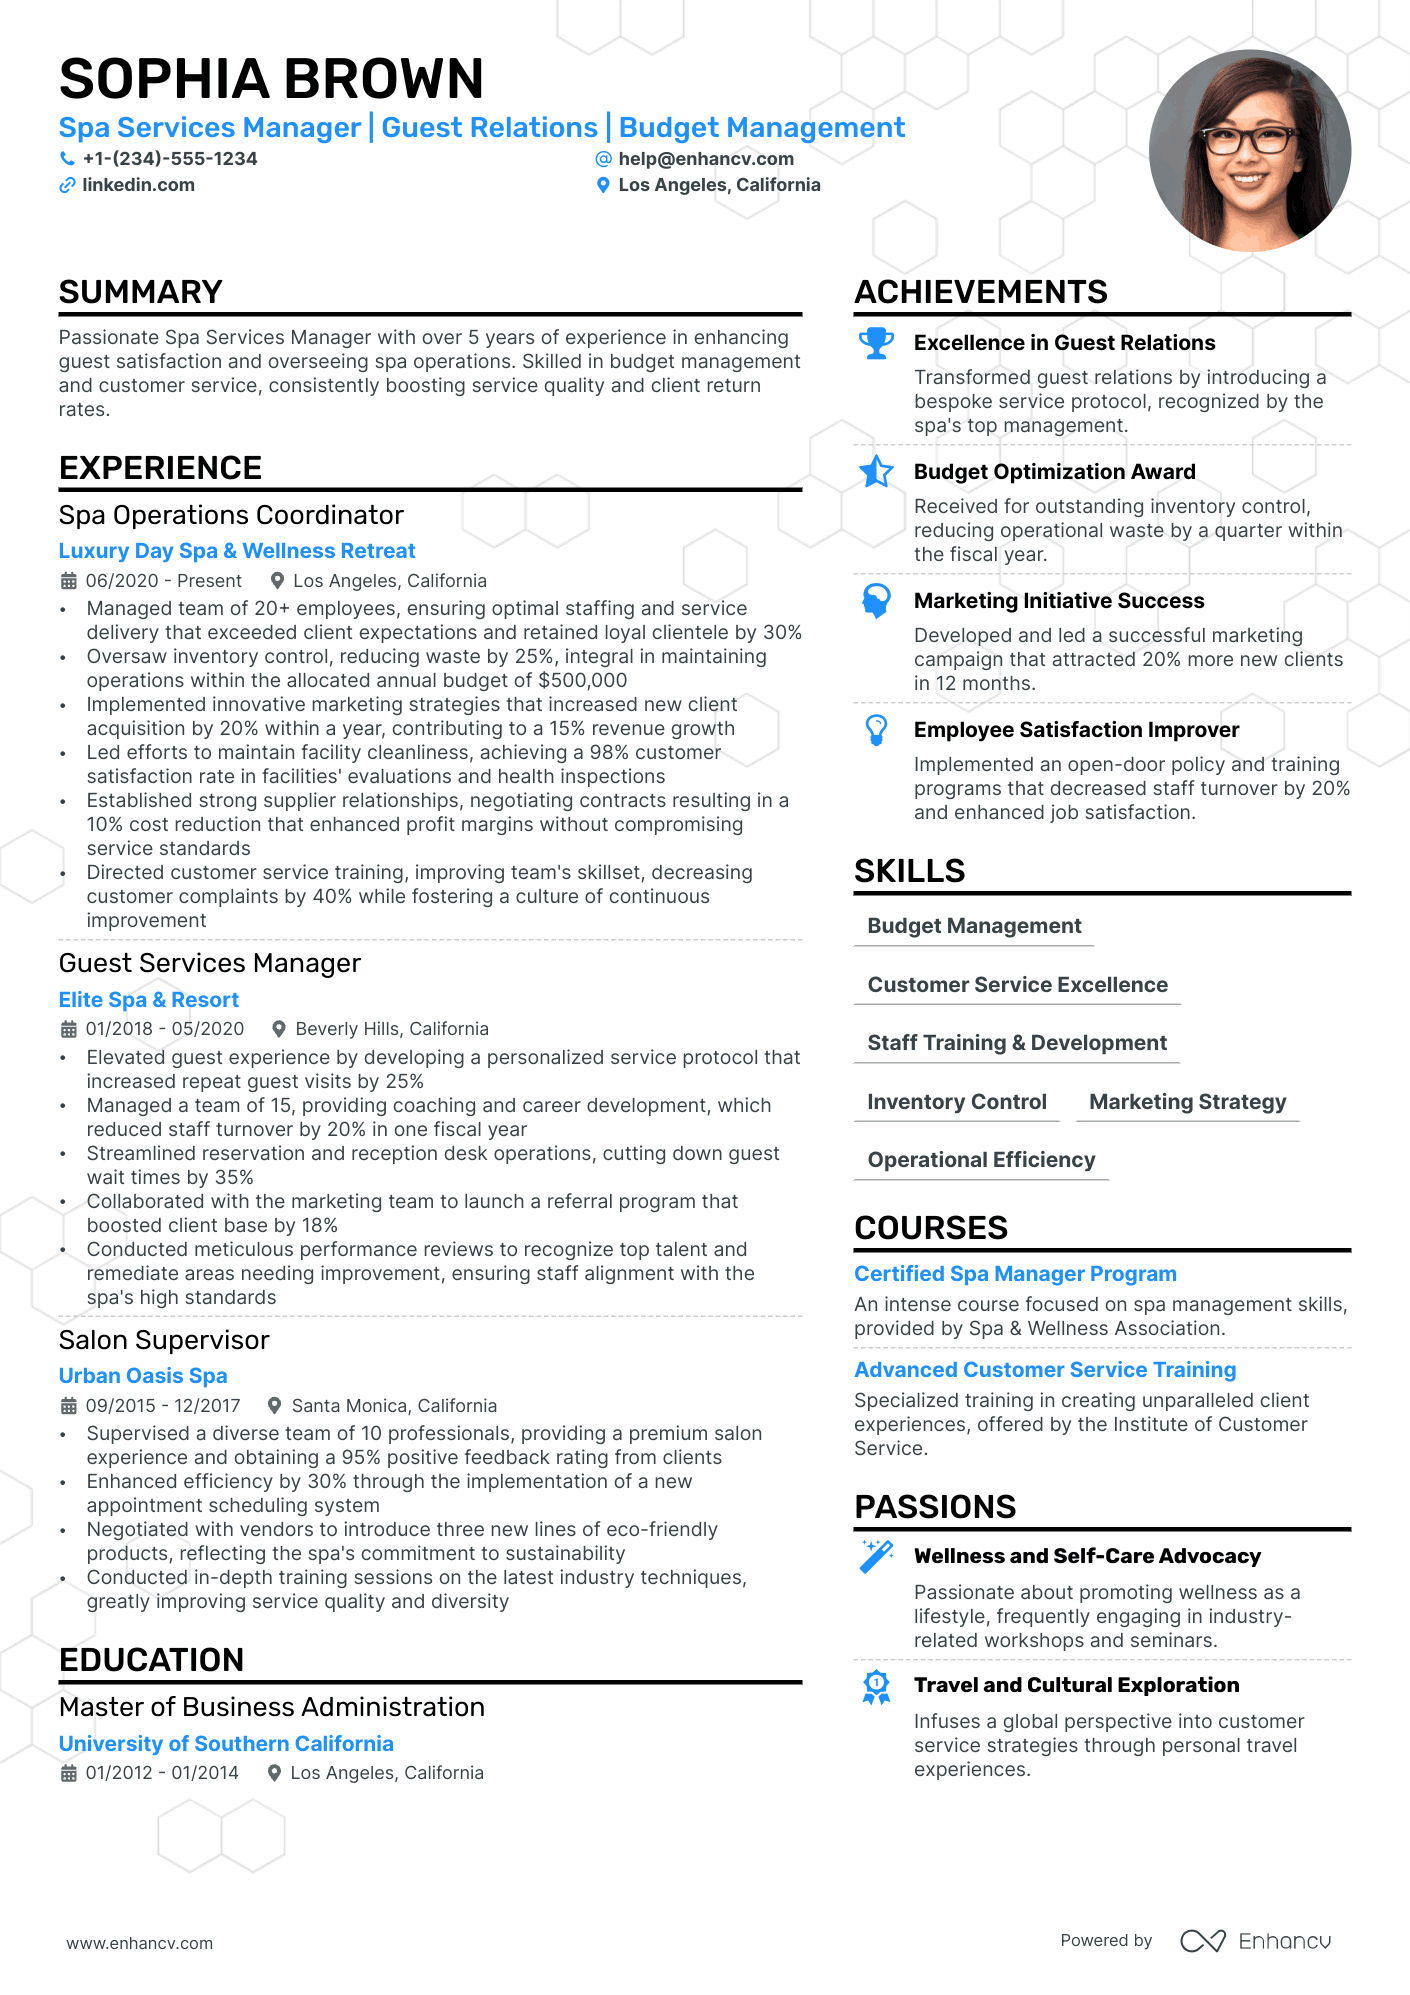 Spa Manager resume example